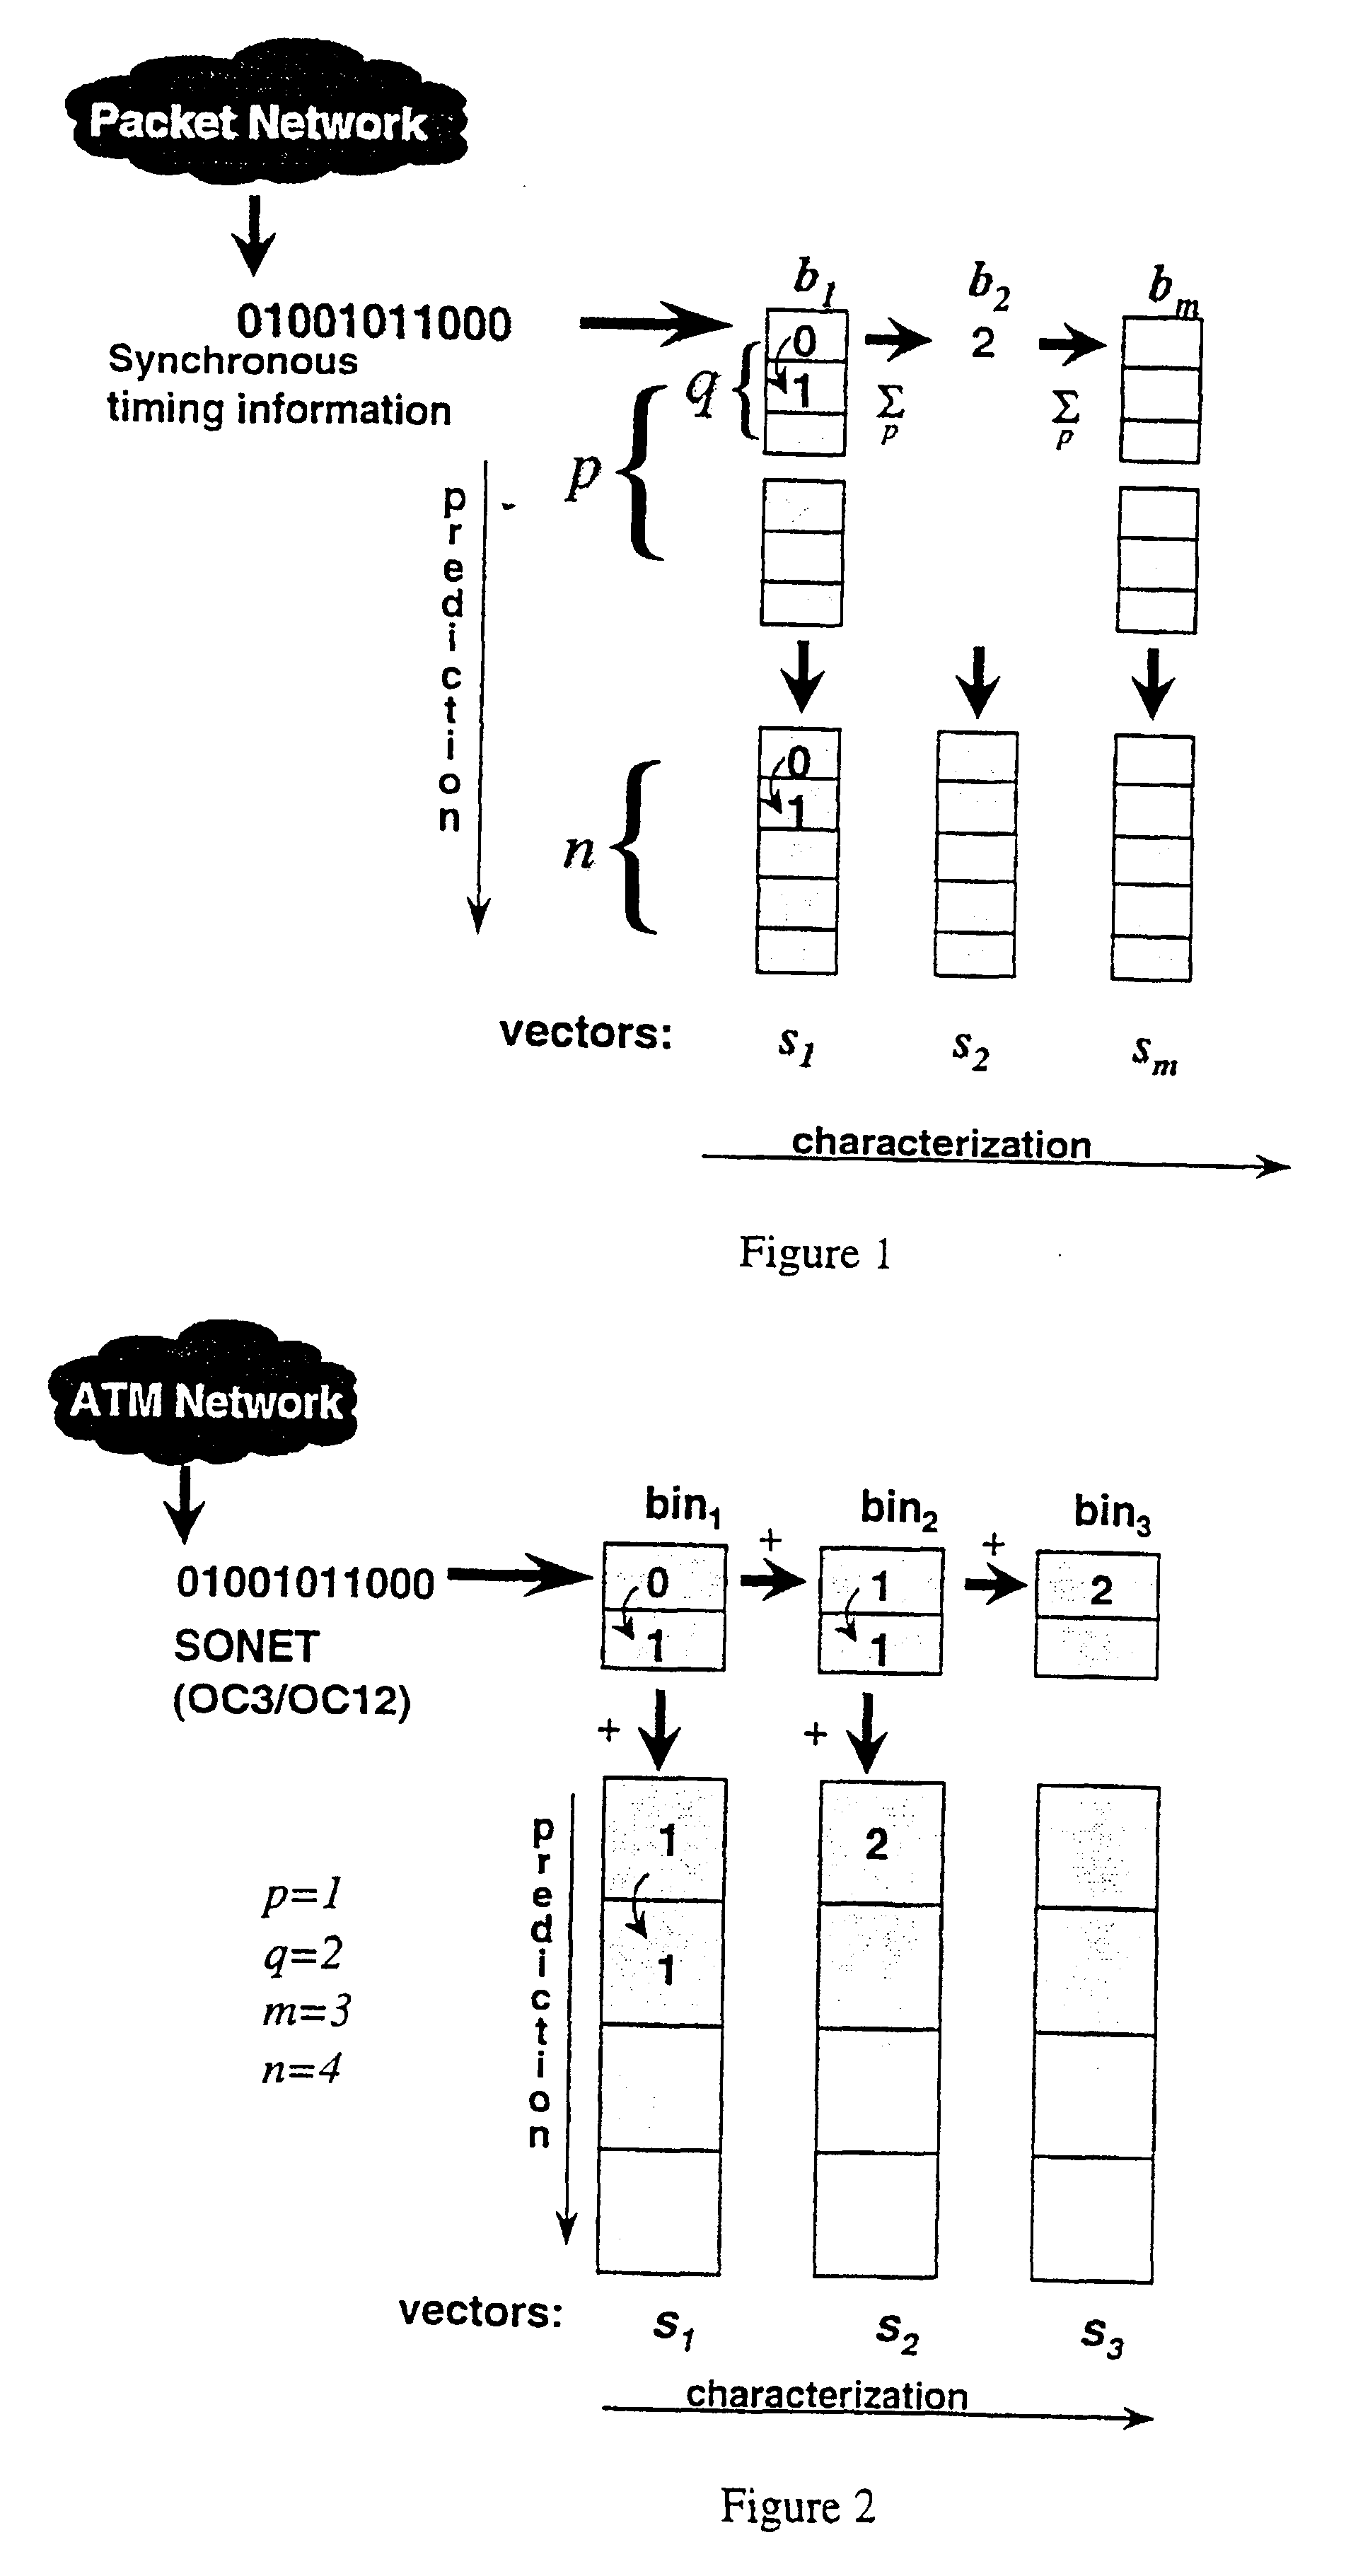 Method for real-time traffic analysis on packet networks